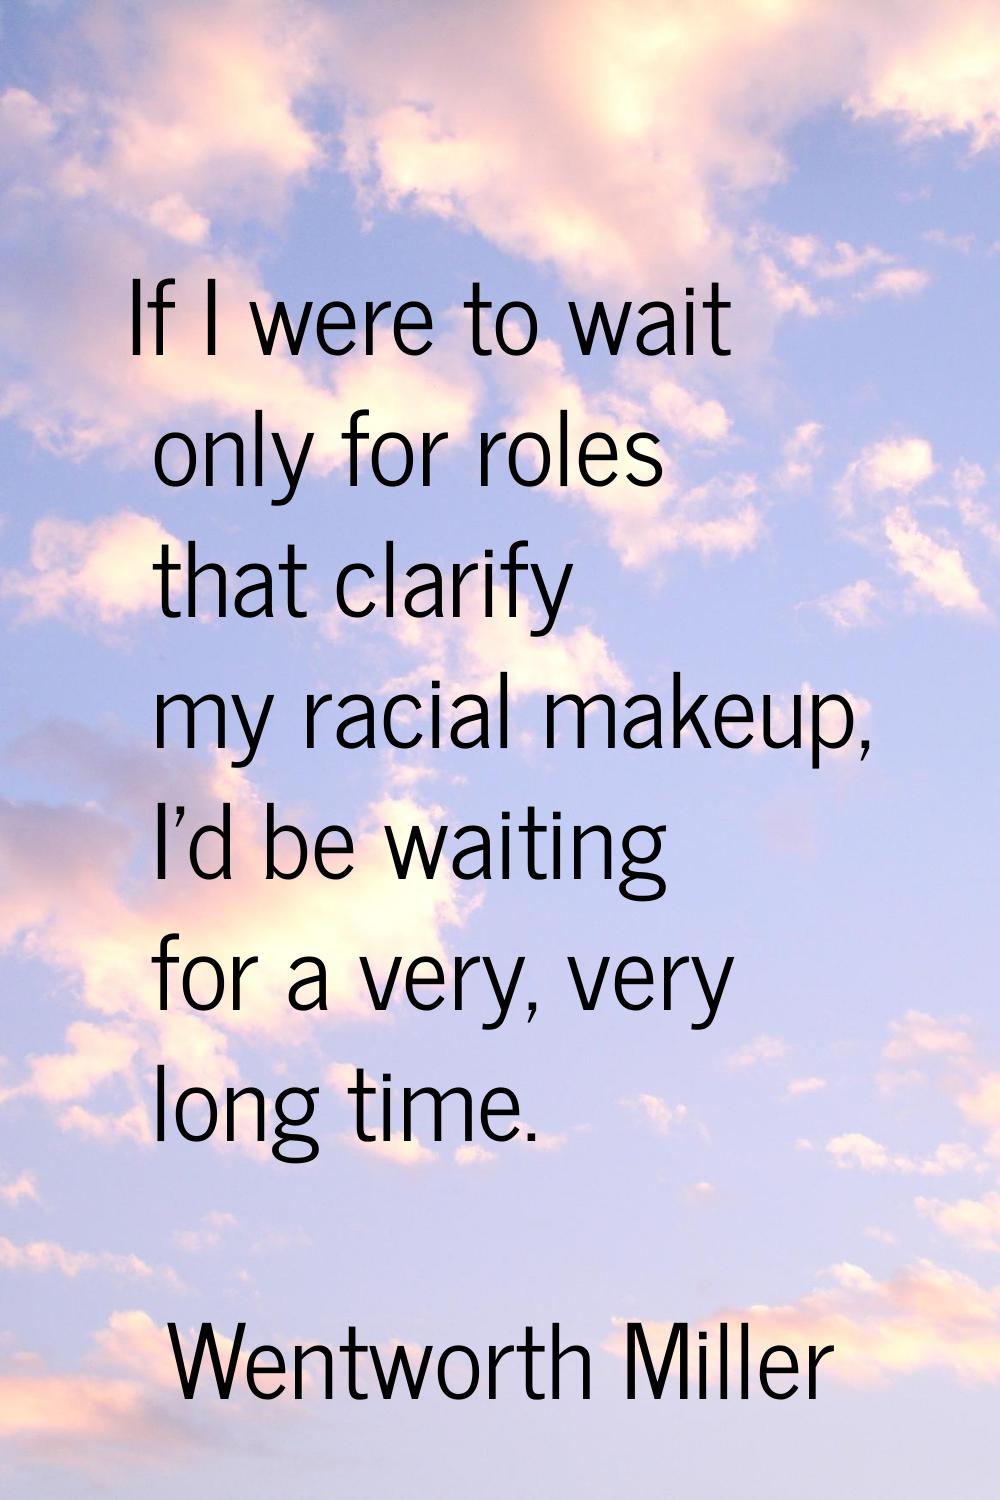 If I were to wait only for roles that clarify my racial makeup, I'd be waiting for a very, very lon